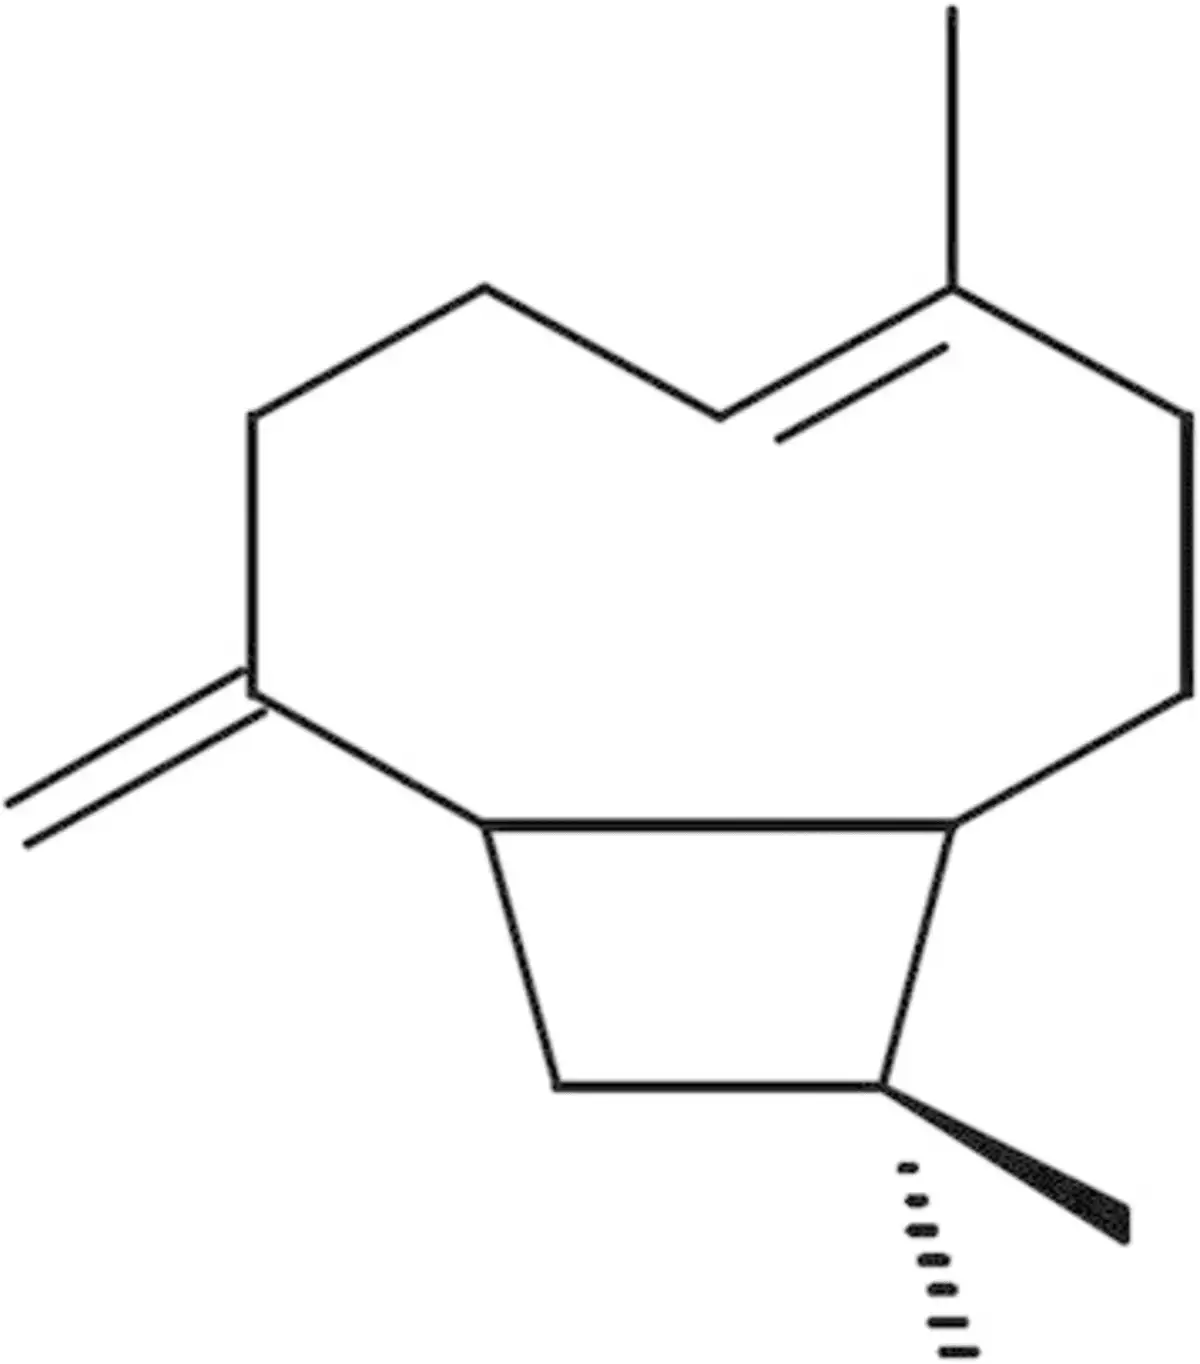 chemical structure of b caryophyllene